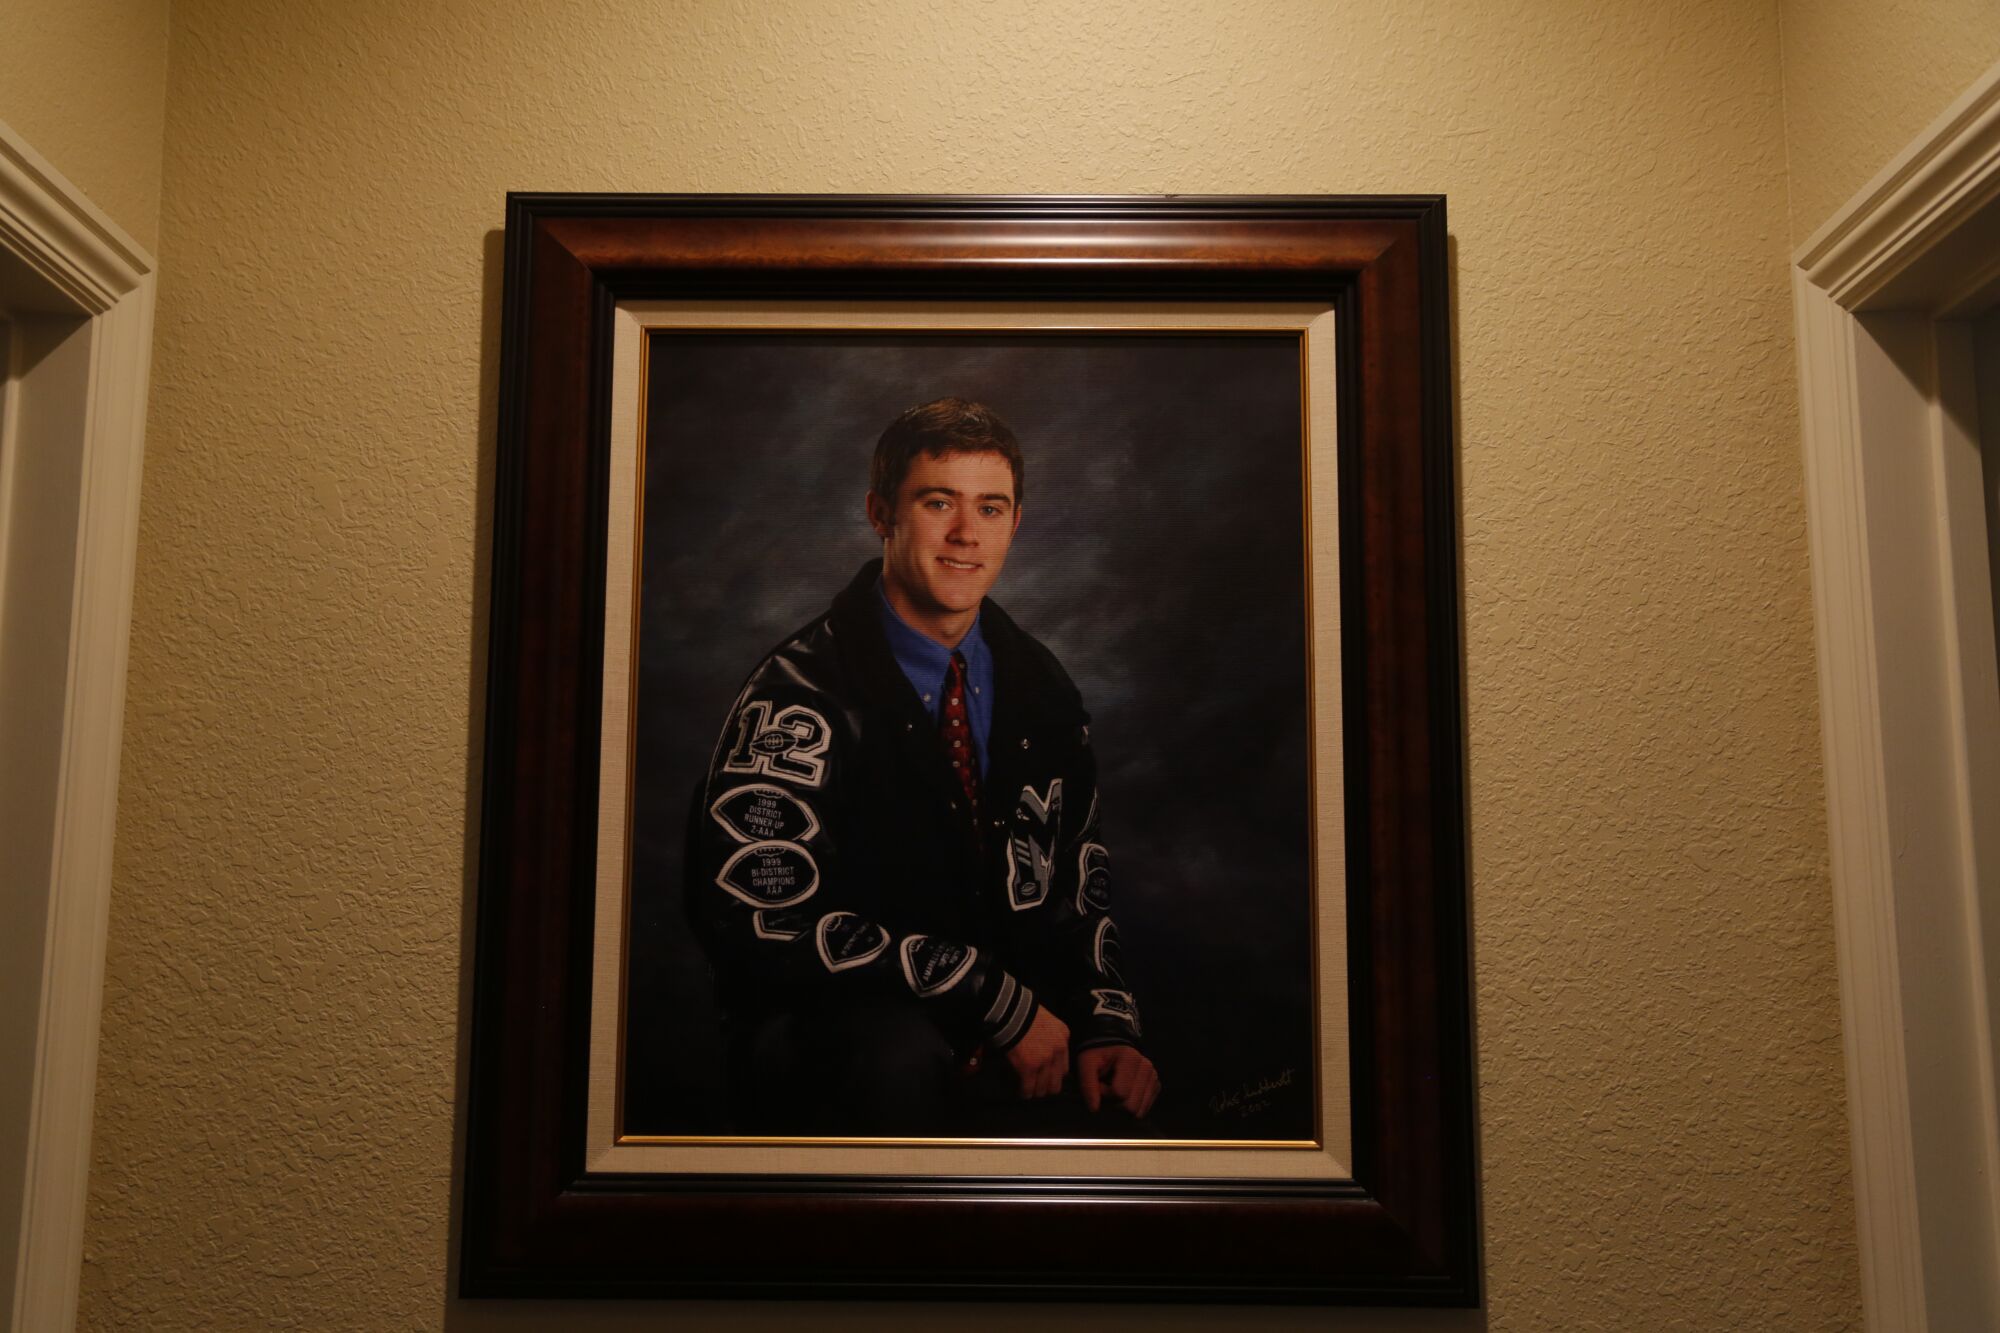 A high school portrait of USC coach Lincoln Riley hangs on the wall of his parent's home in Muleshoe, Texas